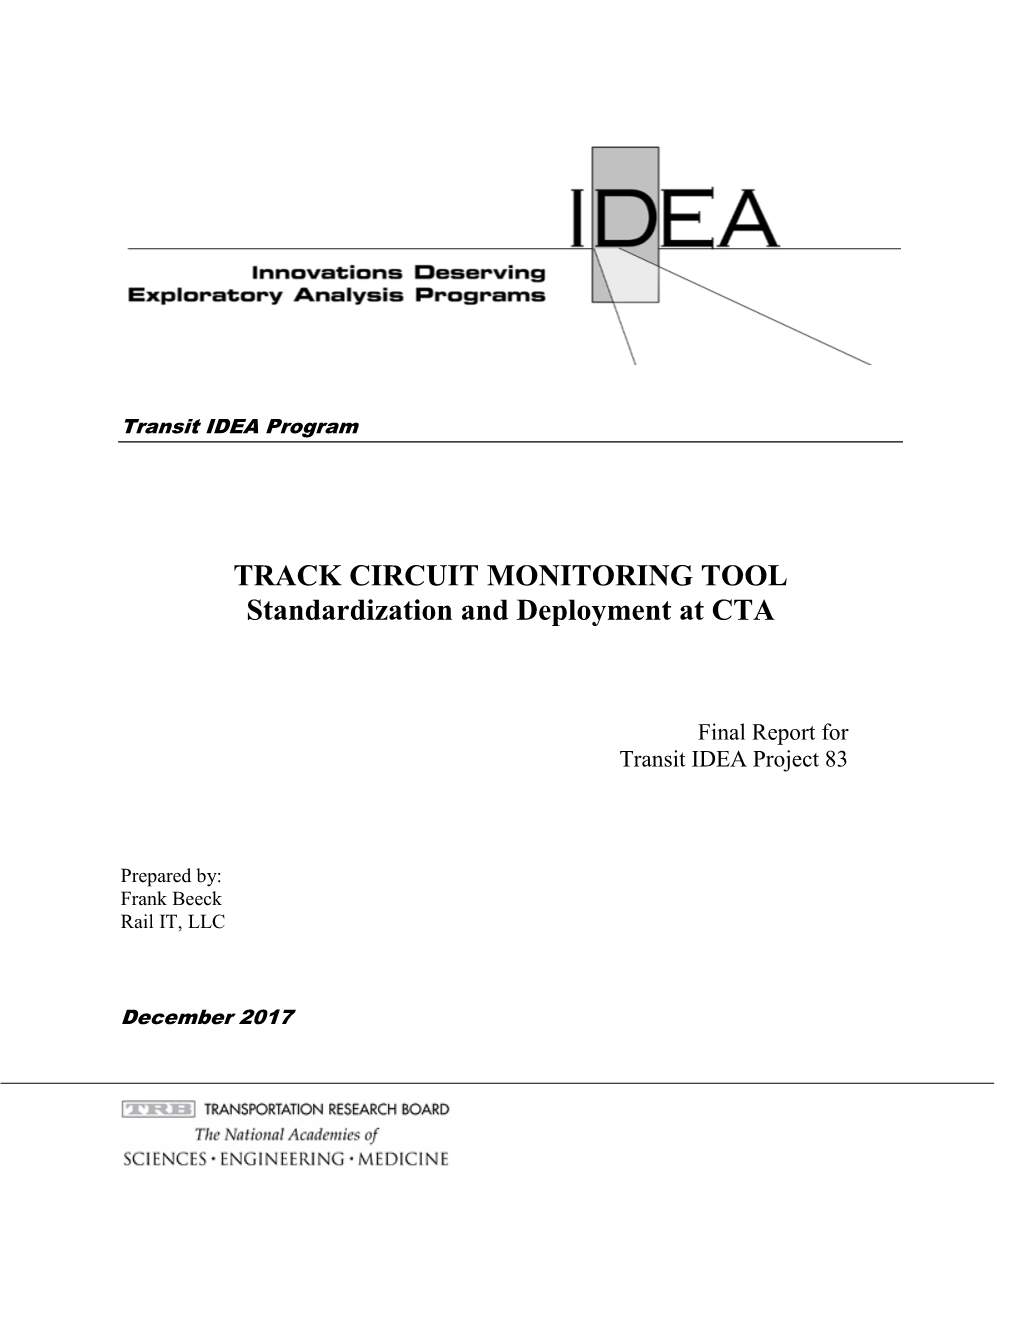 TRACK CIRCUIT MONITORING TOOL Standardization and Deployment at CTA